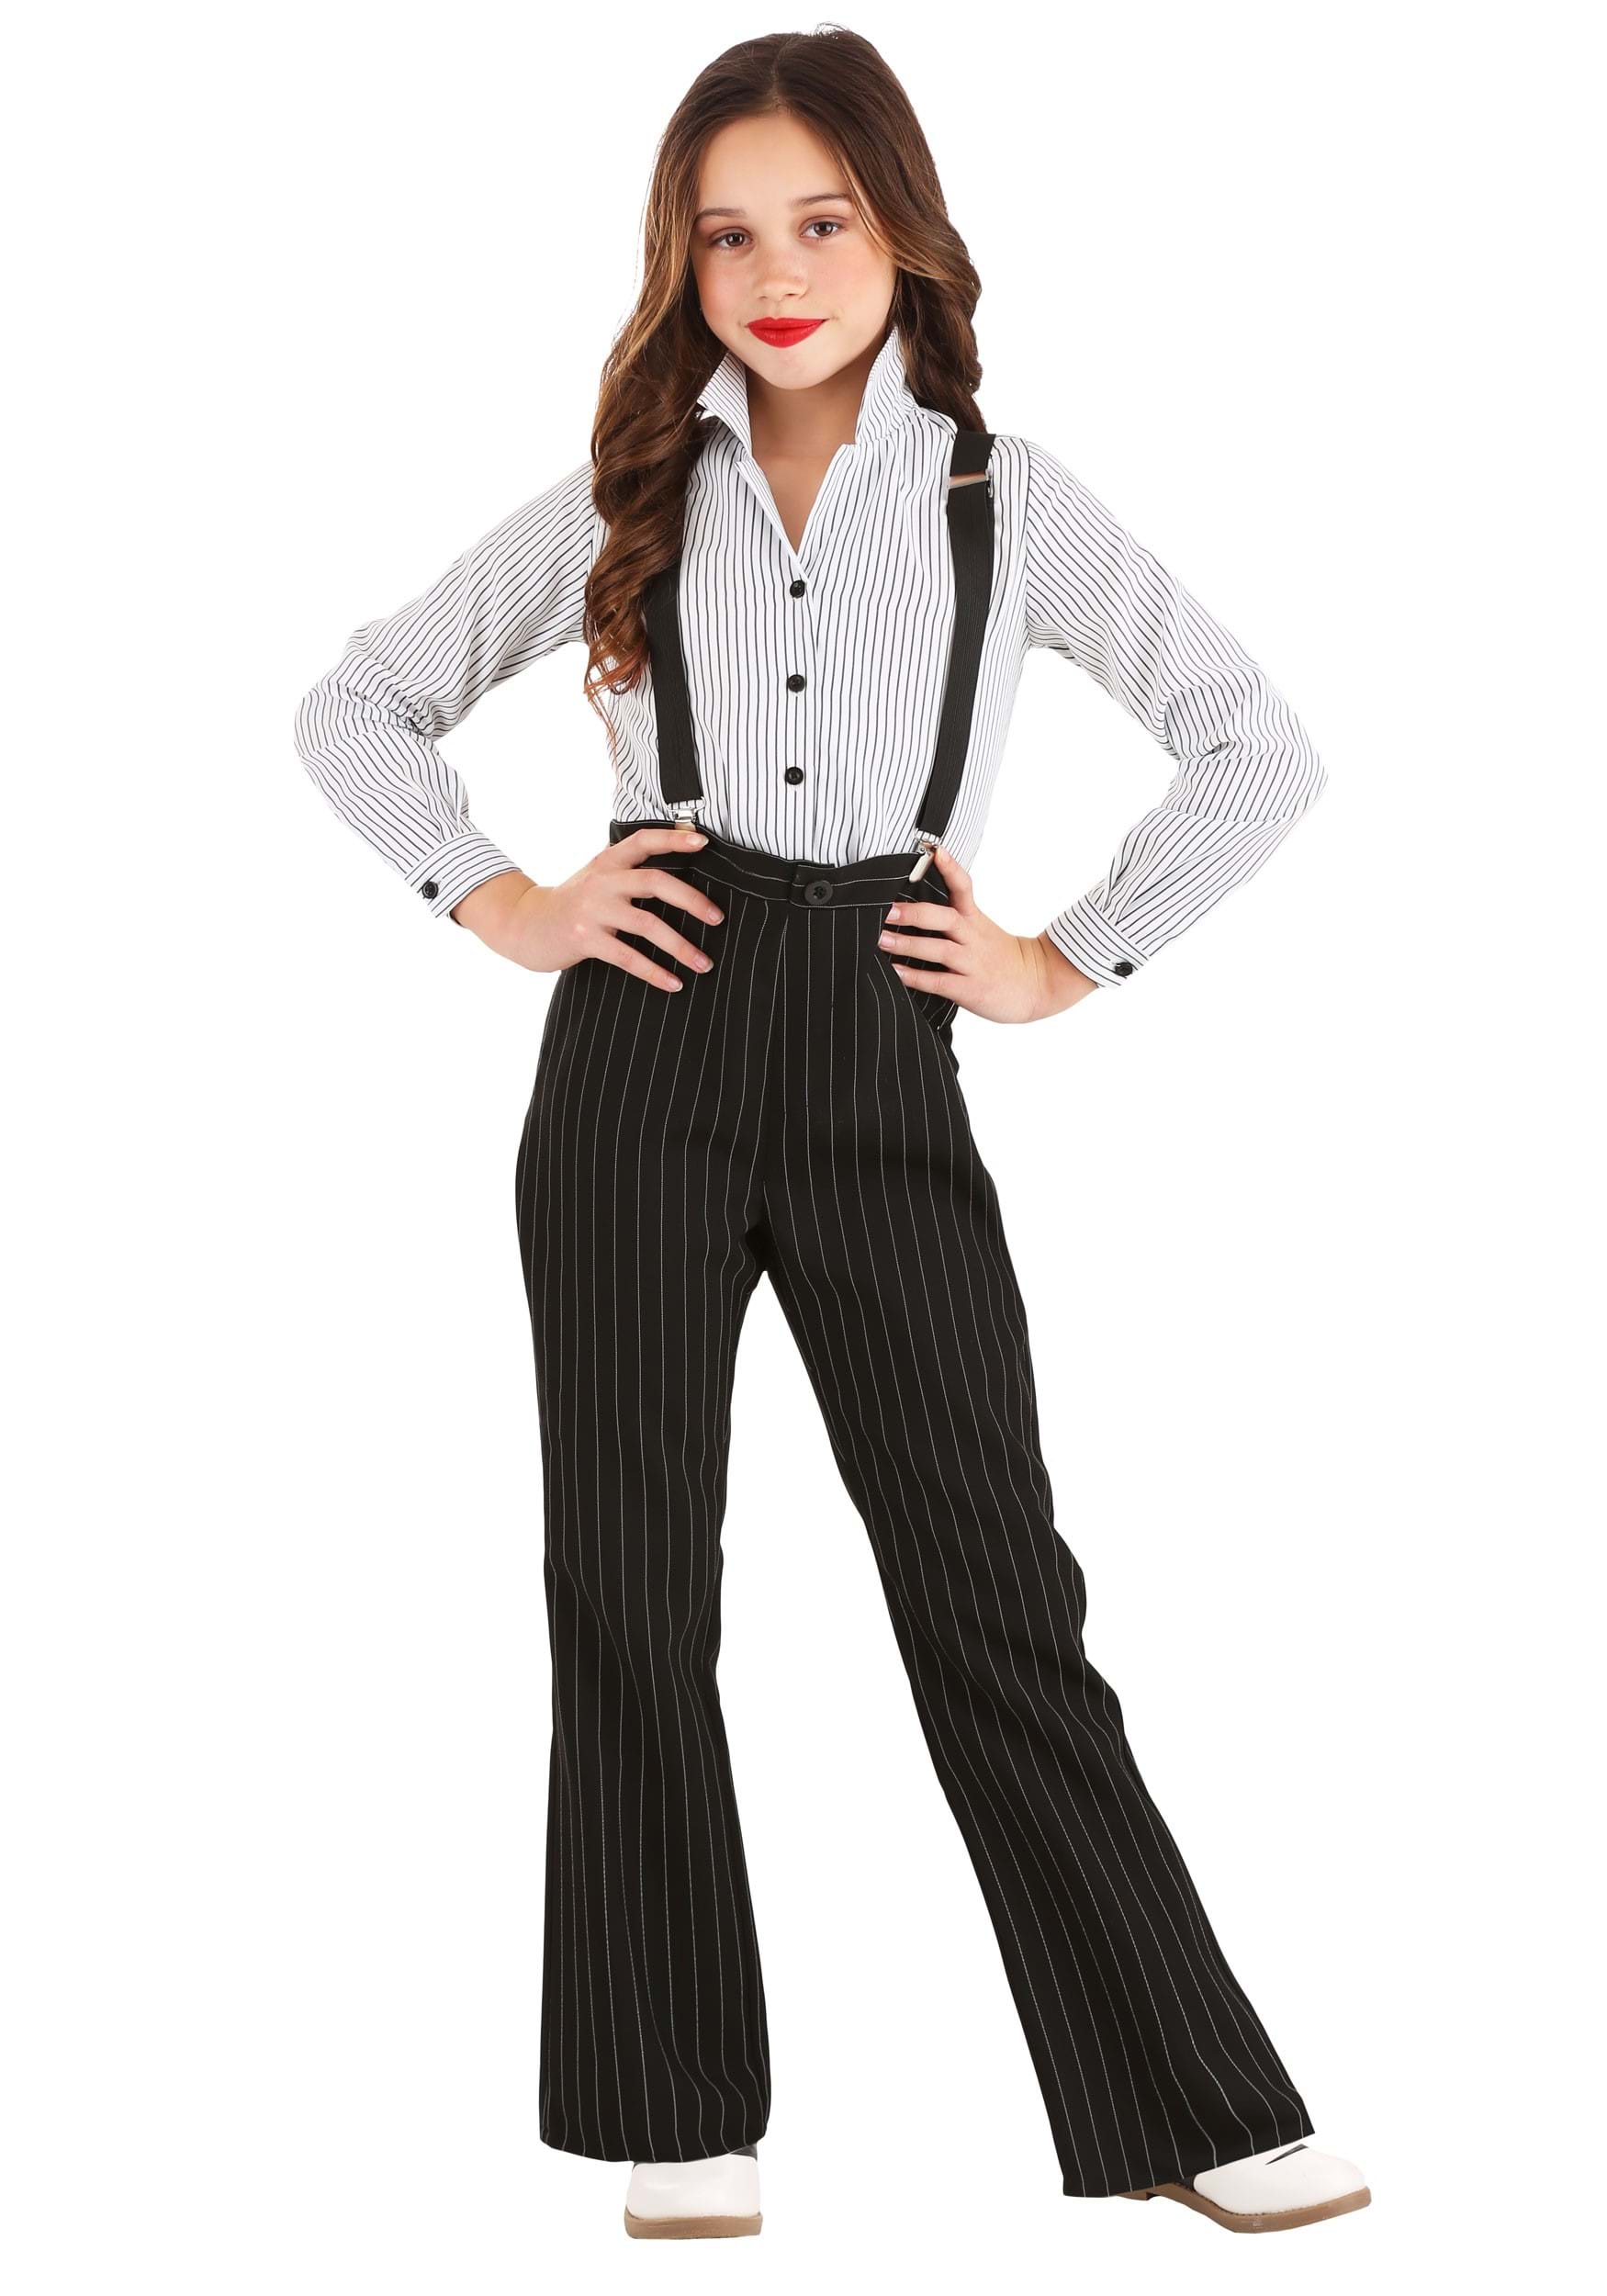 Photos - Fancy Dress A&D FUN Costumes Girl's Gangster Lady Costume | 1920s Costumes and Accessories 